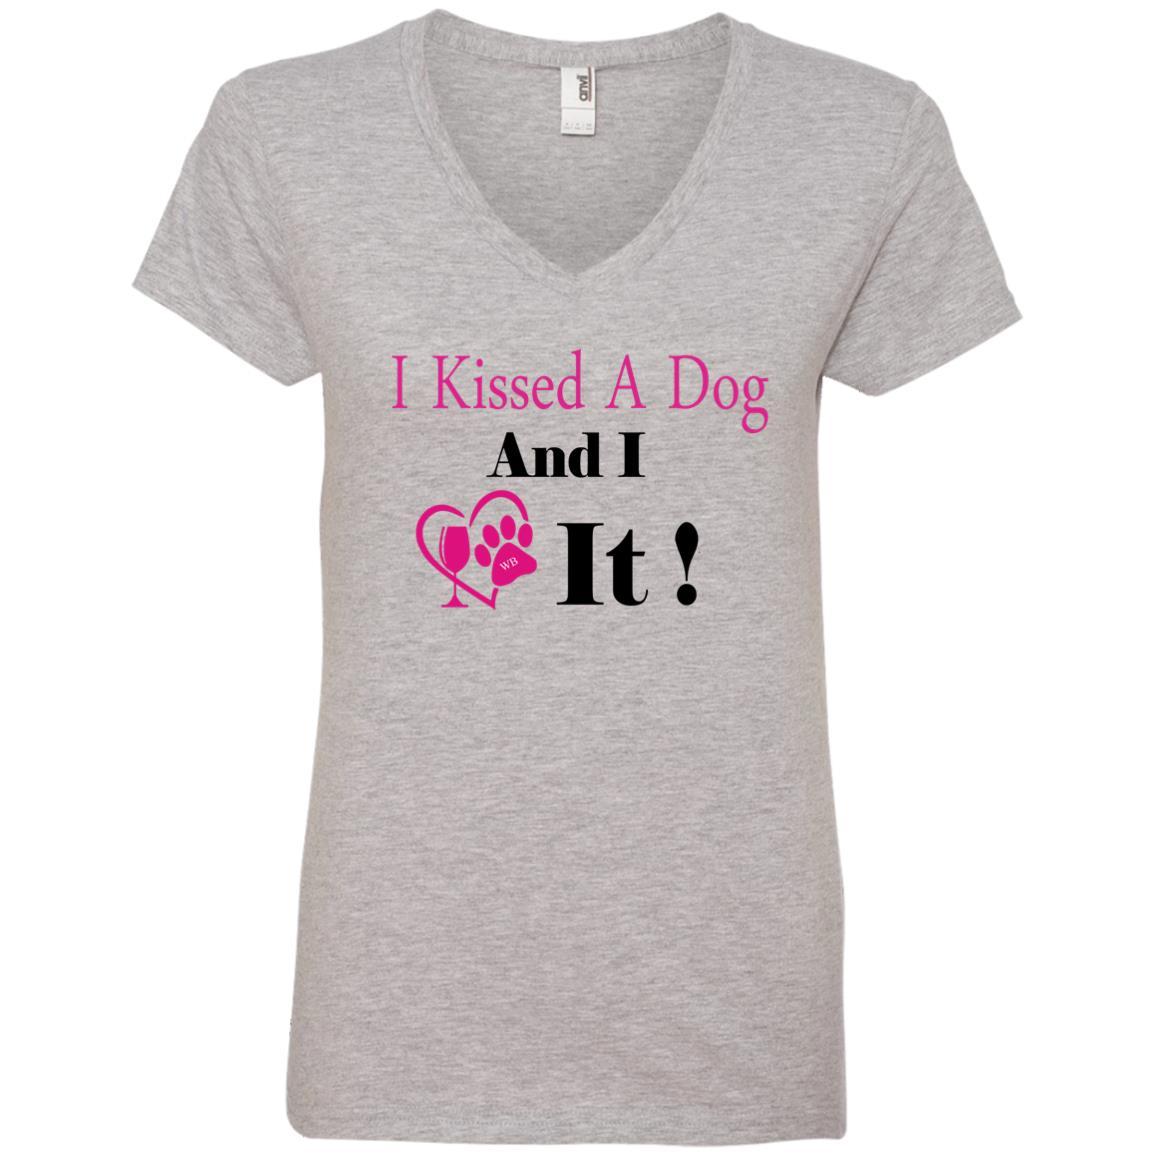 T-Shirts Heather Grey / S WineyBitches.co "I Kissed A Dog And I Loved It:" Ladies' V-Neck T-Shirt WineyBitchesCo